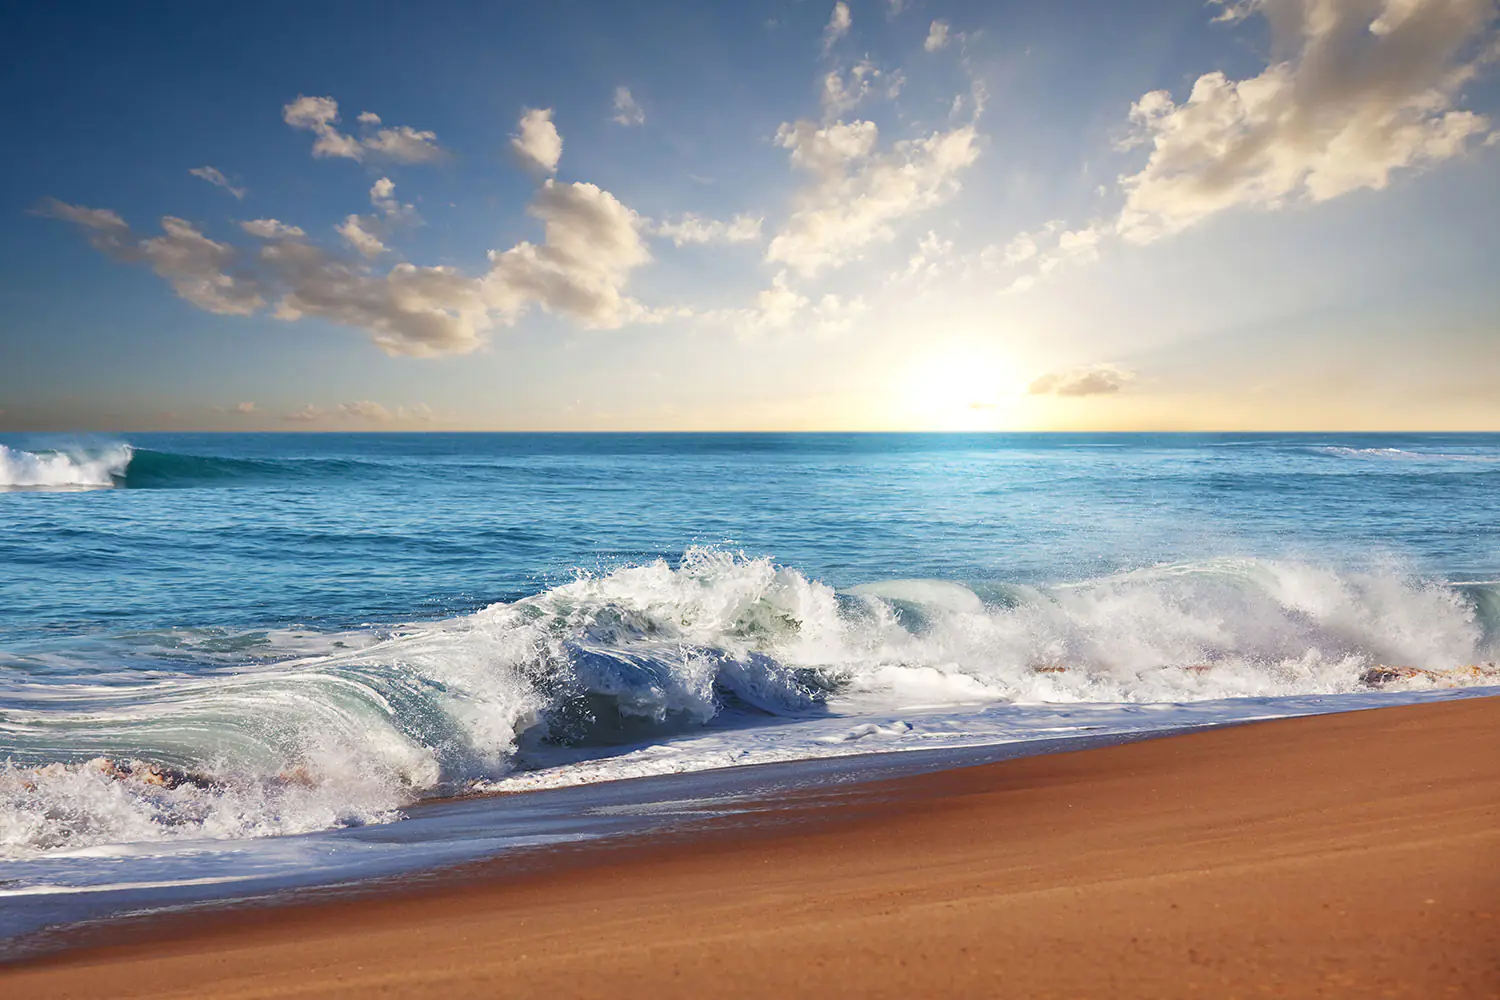 Wall Mural Photo Wallpaper The Waves Of The Sea